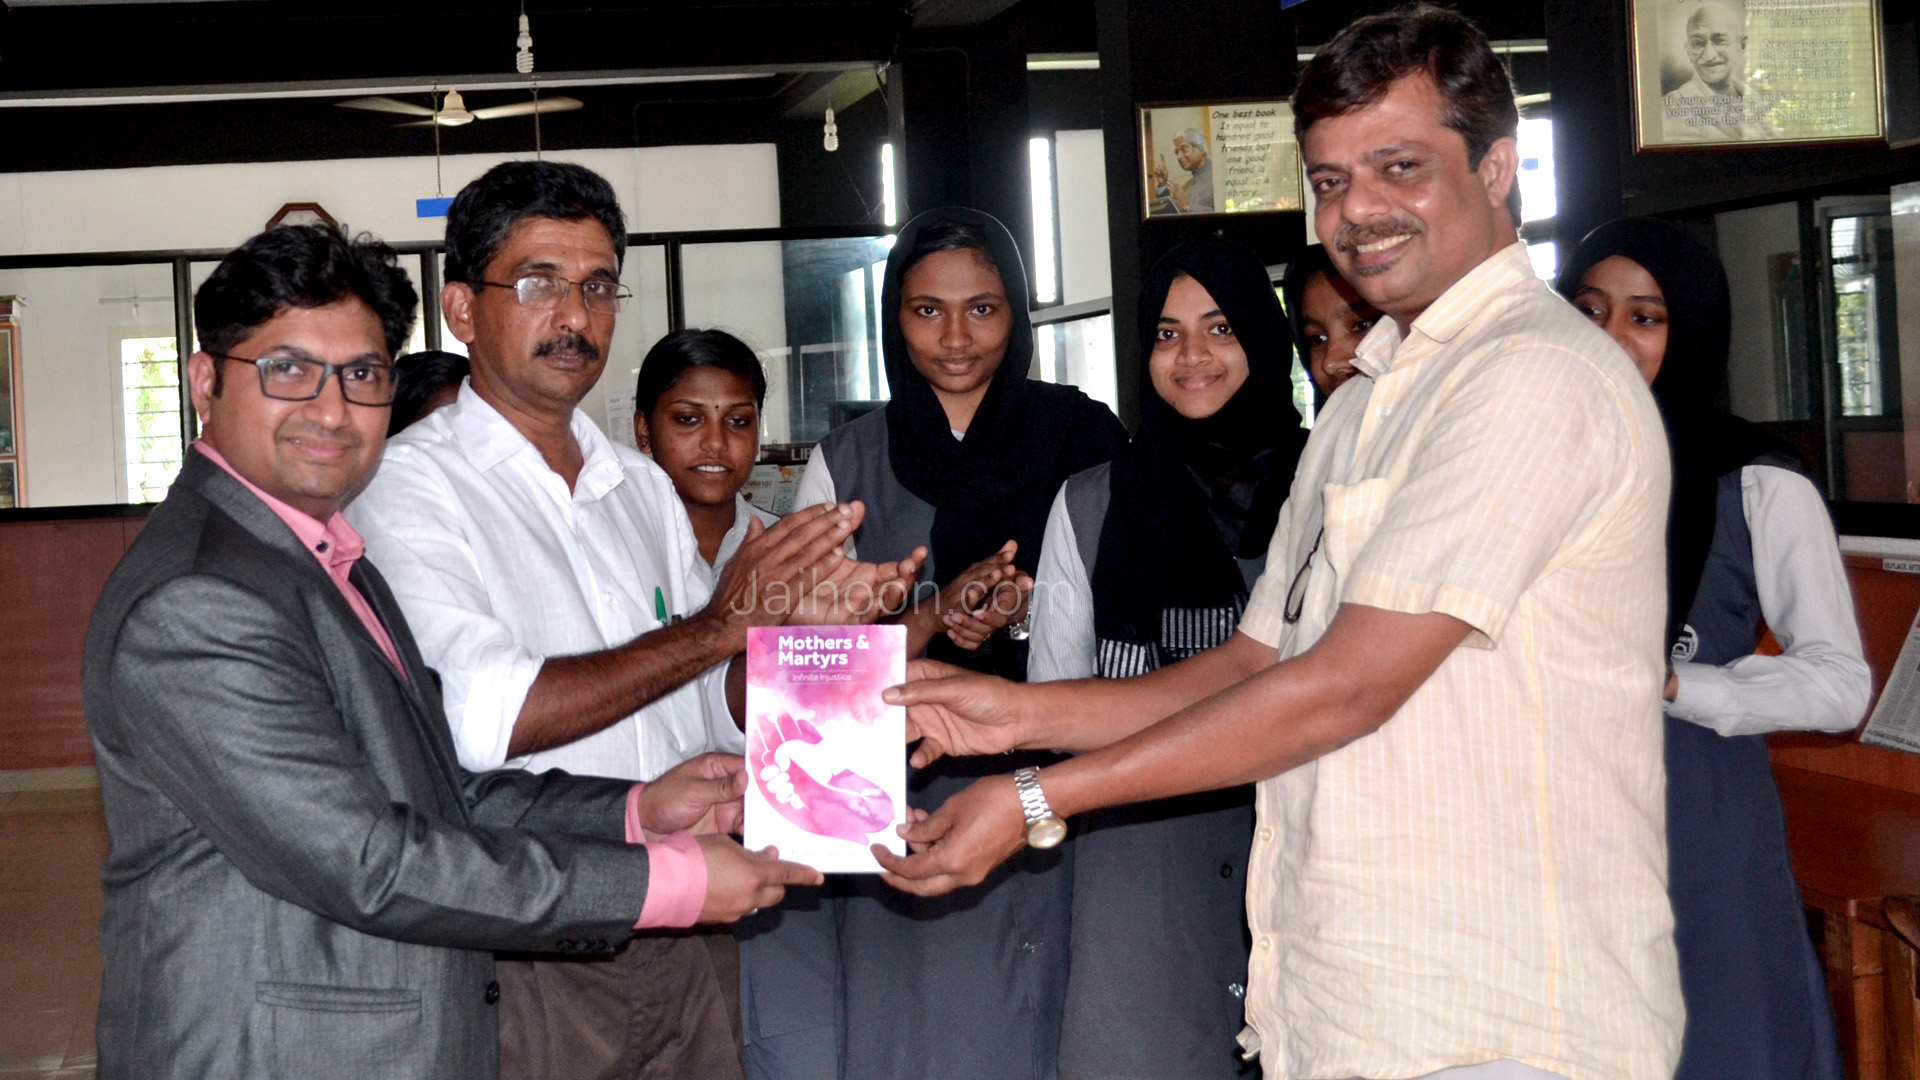 Presenting Mothers & Martyr's book to KAHM Unity Women's College, Manjeri - Kerala (Oct 2017)